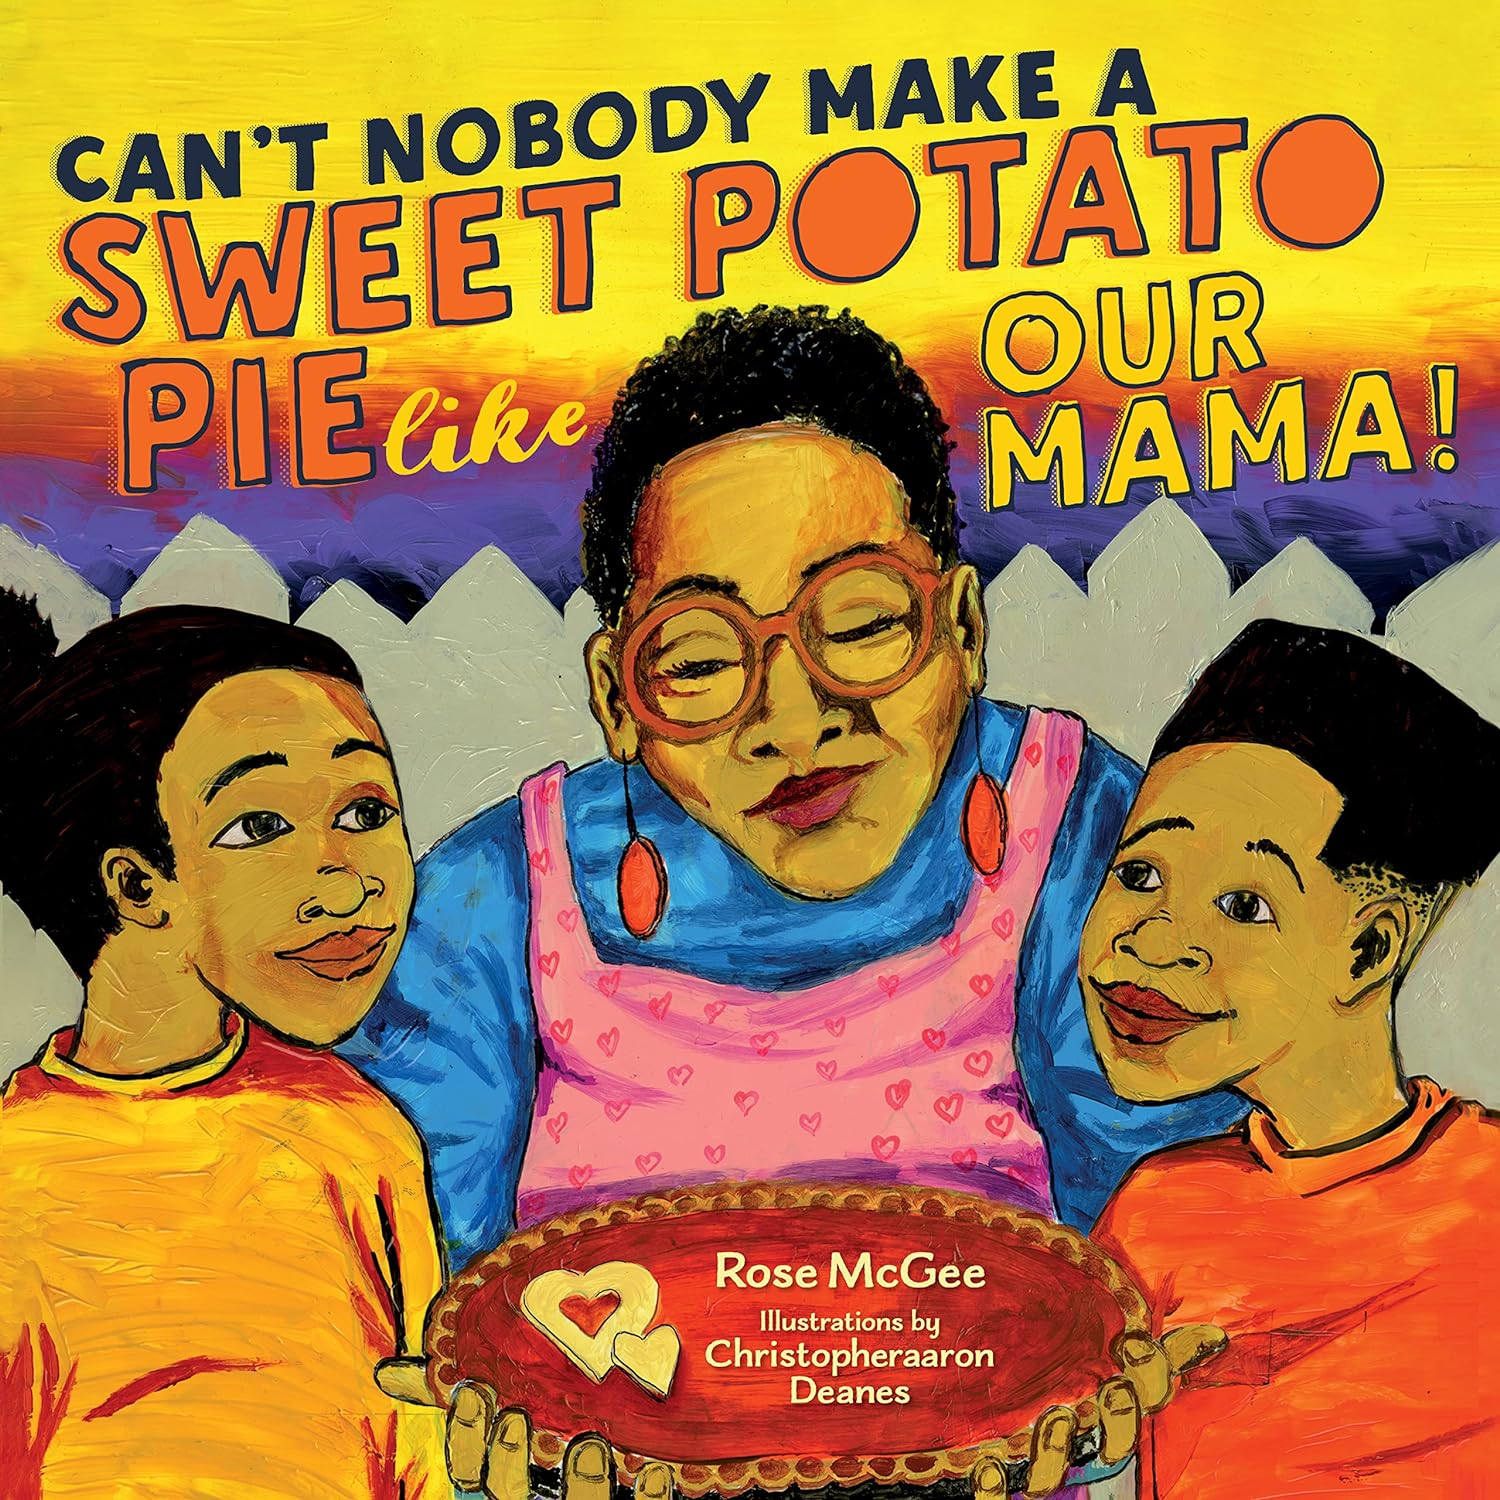 Can't Nobody Make a Sweet Potato Pie Like Our Mama!